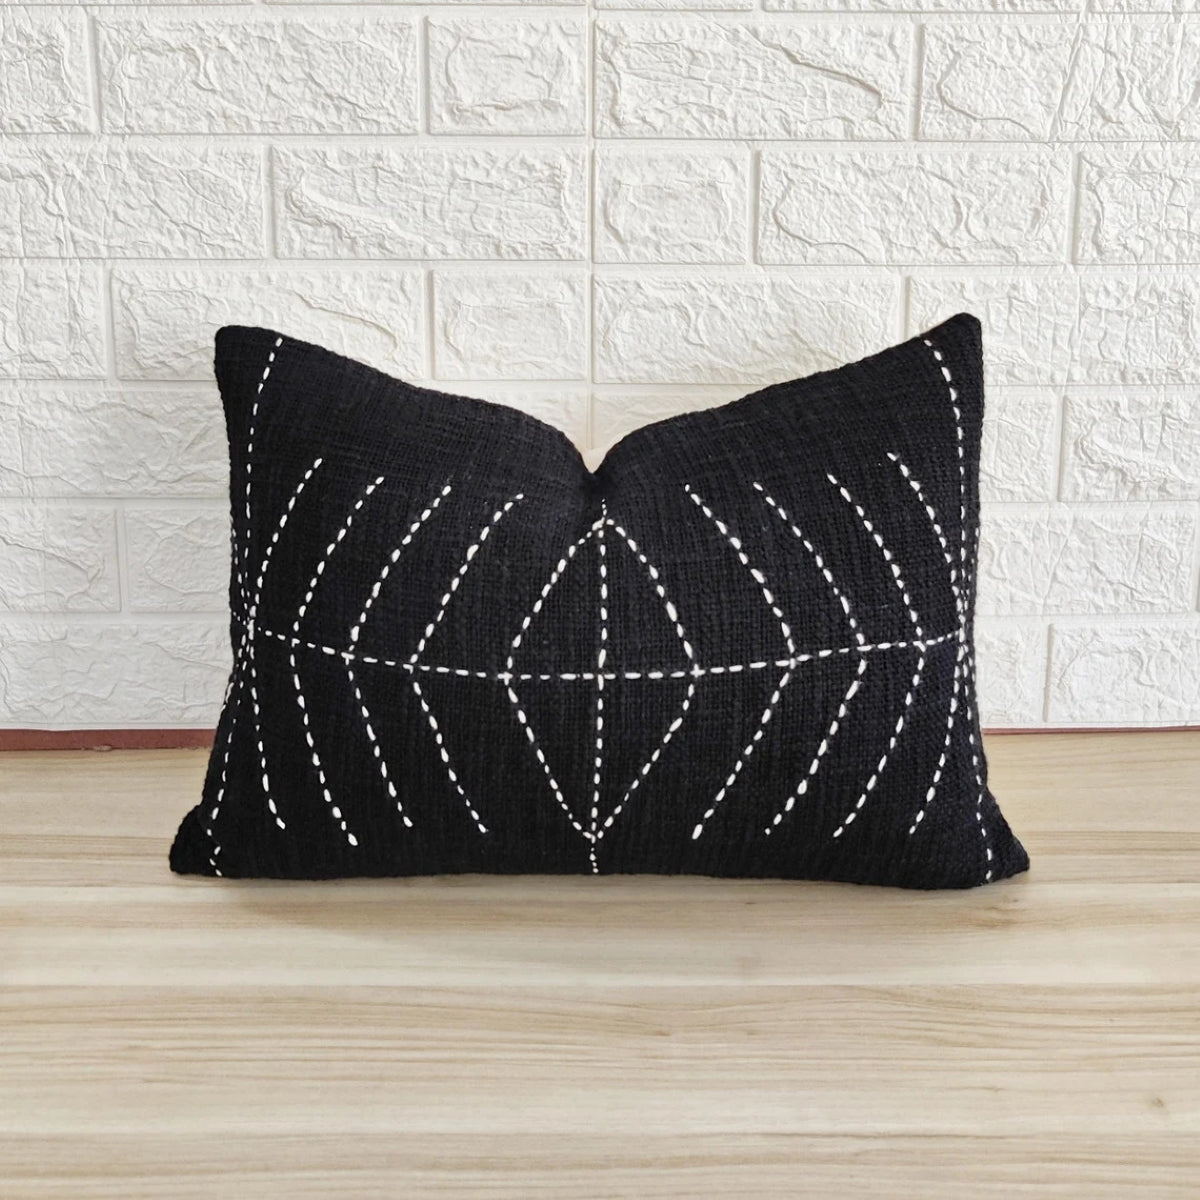 Hand Dyed Black Kantha Pillow Cover